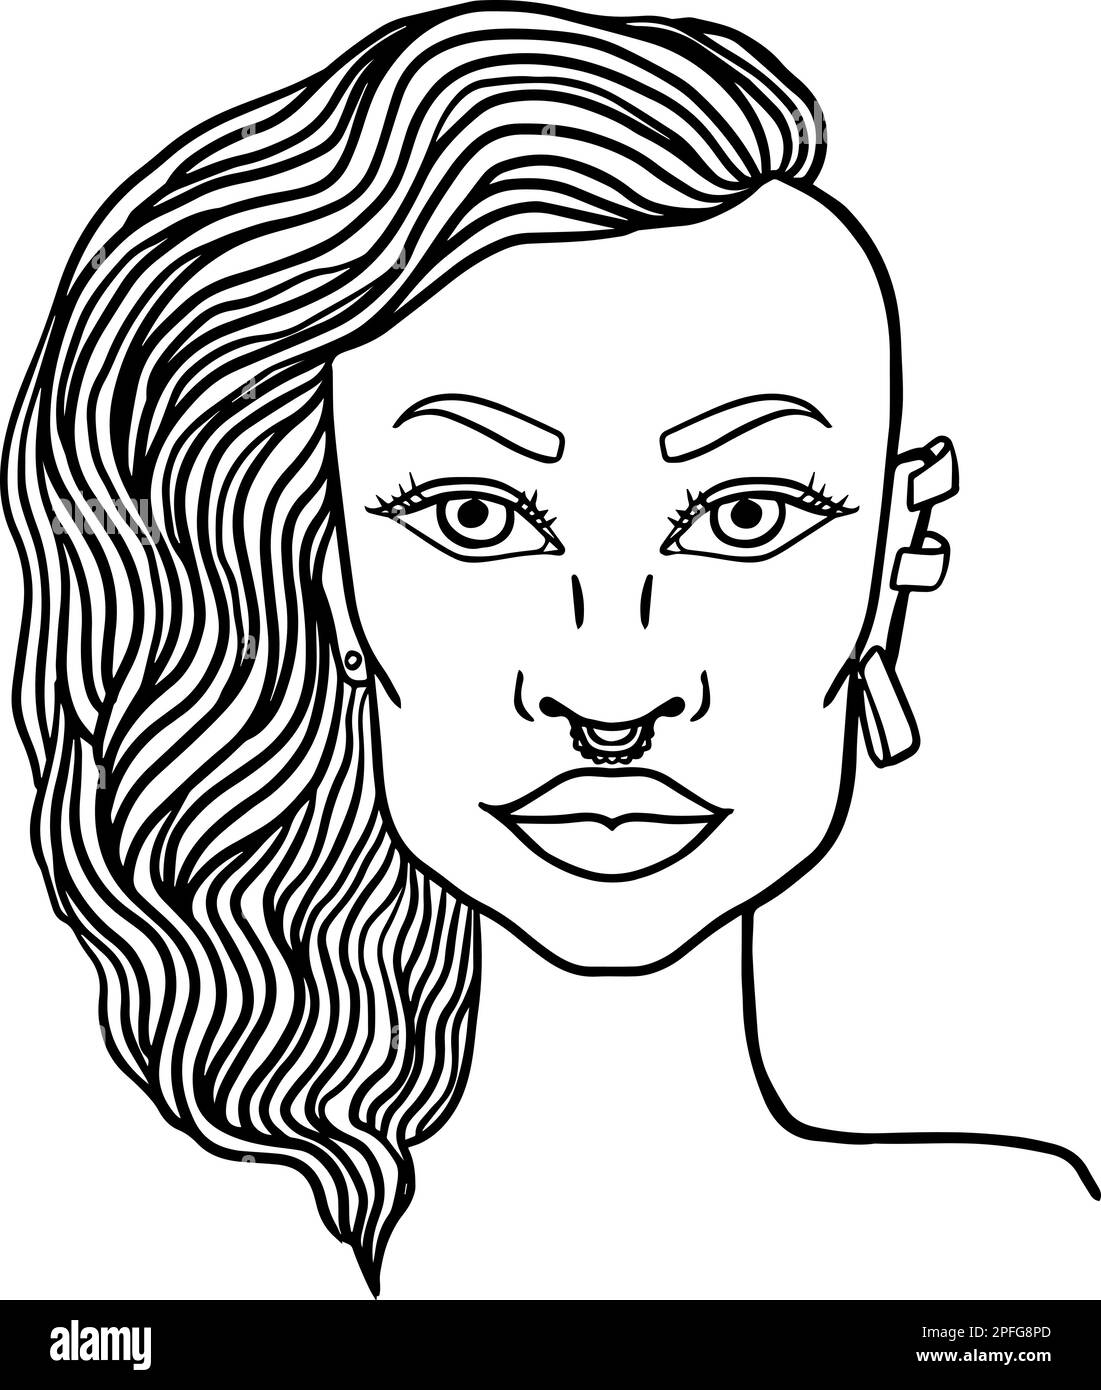 Doodle girl portrait for adult coloring book stock vector image art